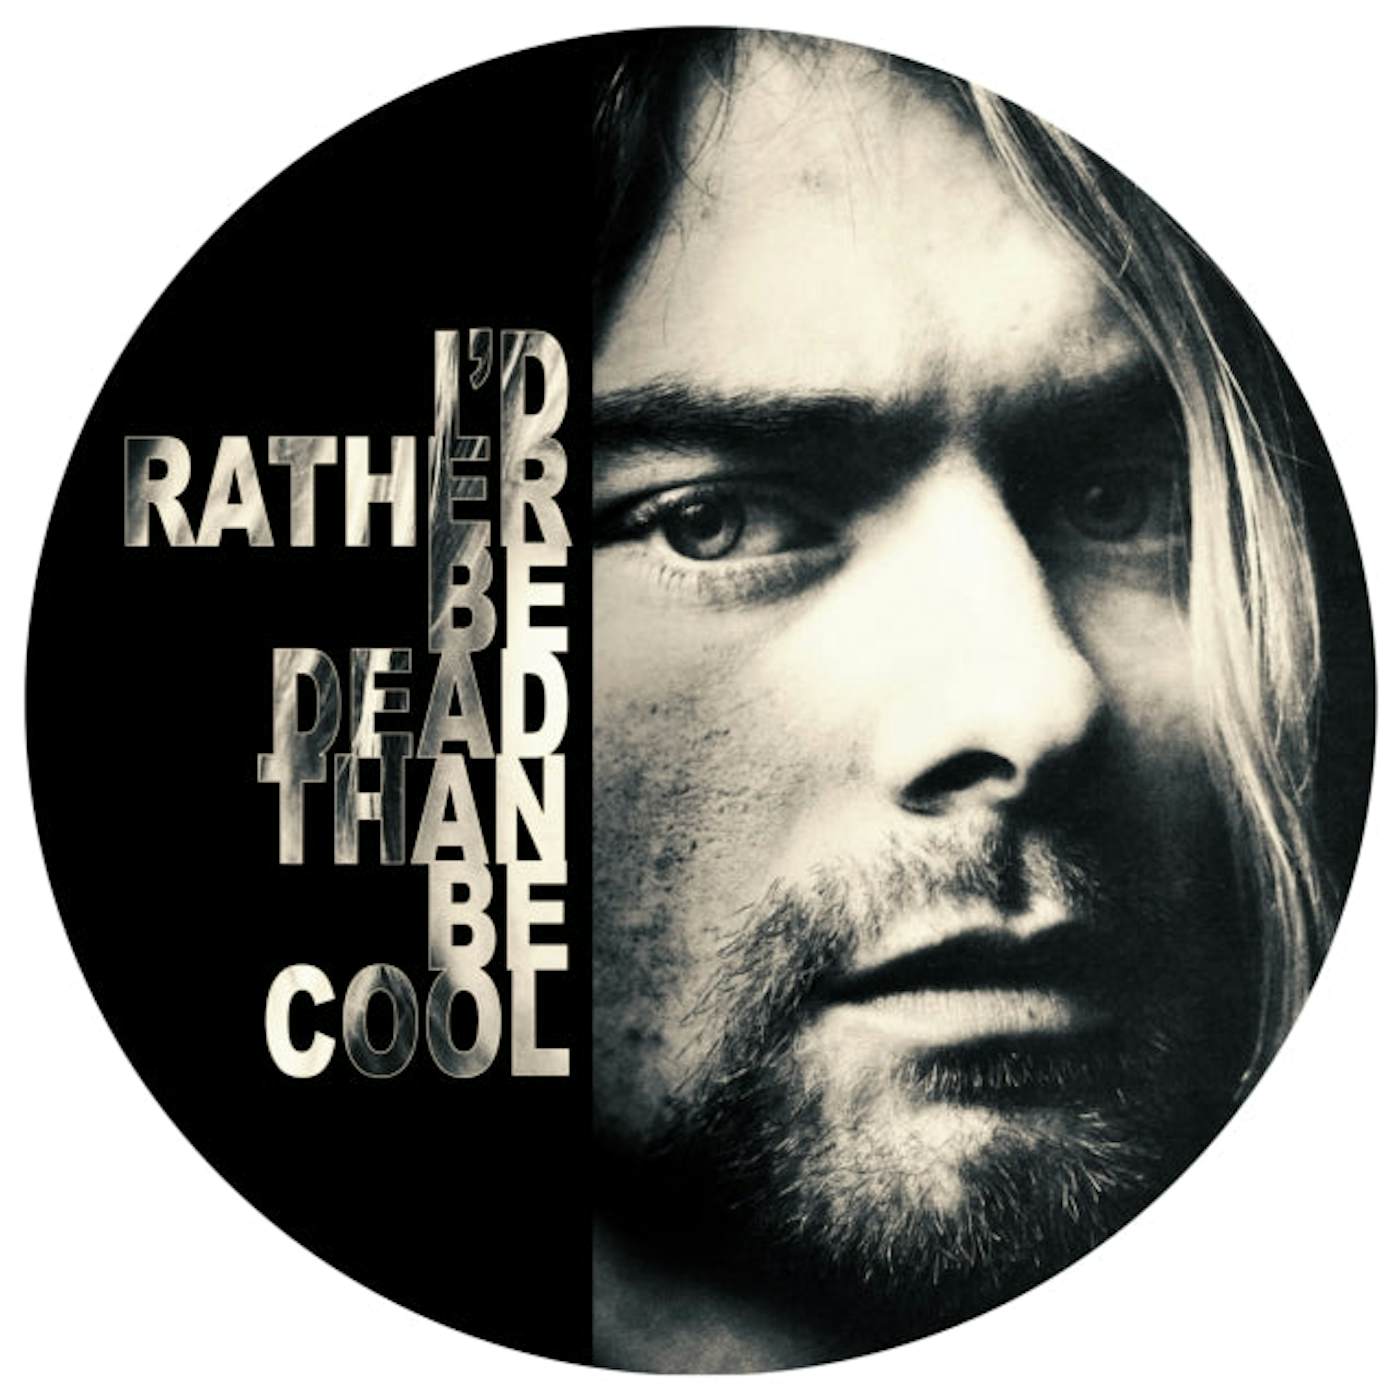 Nirvana LP - I Would Rather Be Dead Than Be Cool - Live At The Hollywood Rock Festival 1993 (Picture Disc) (Vinyl)